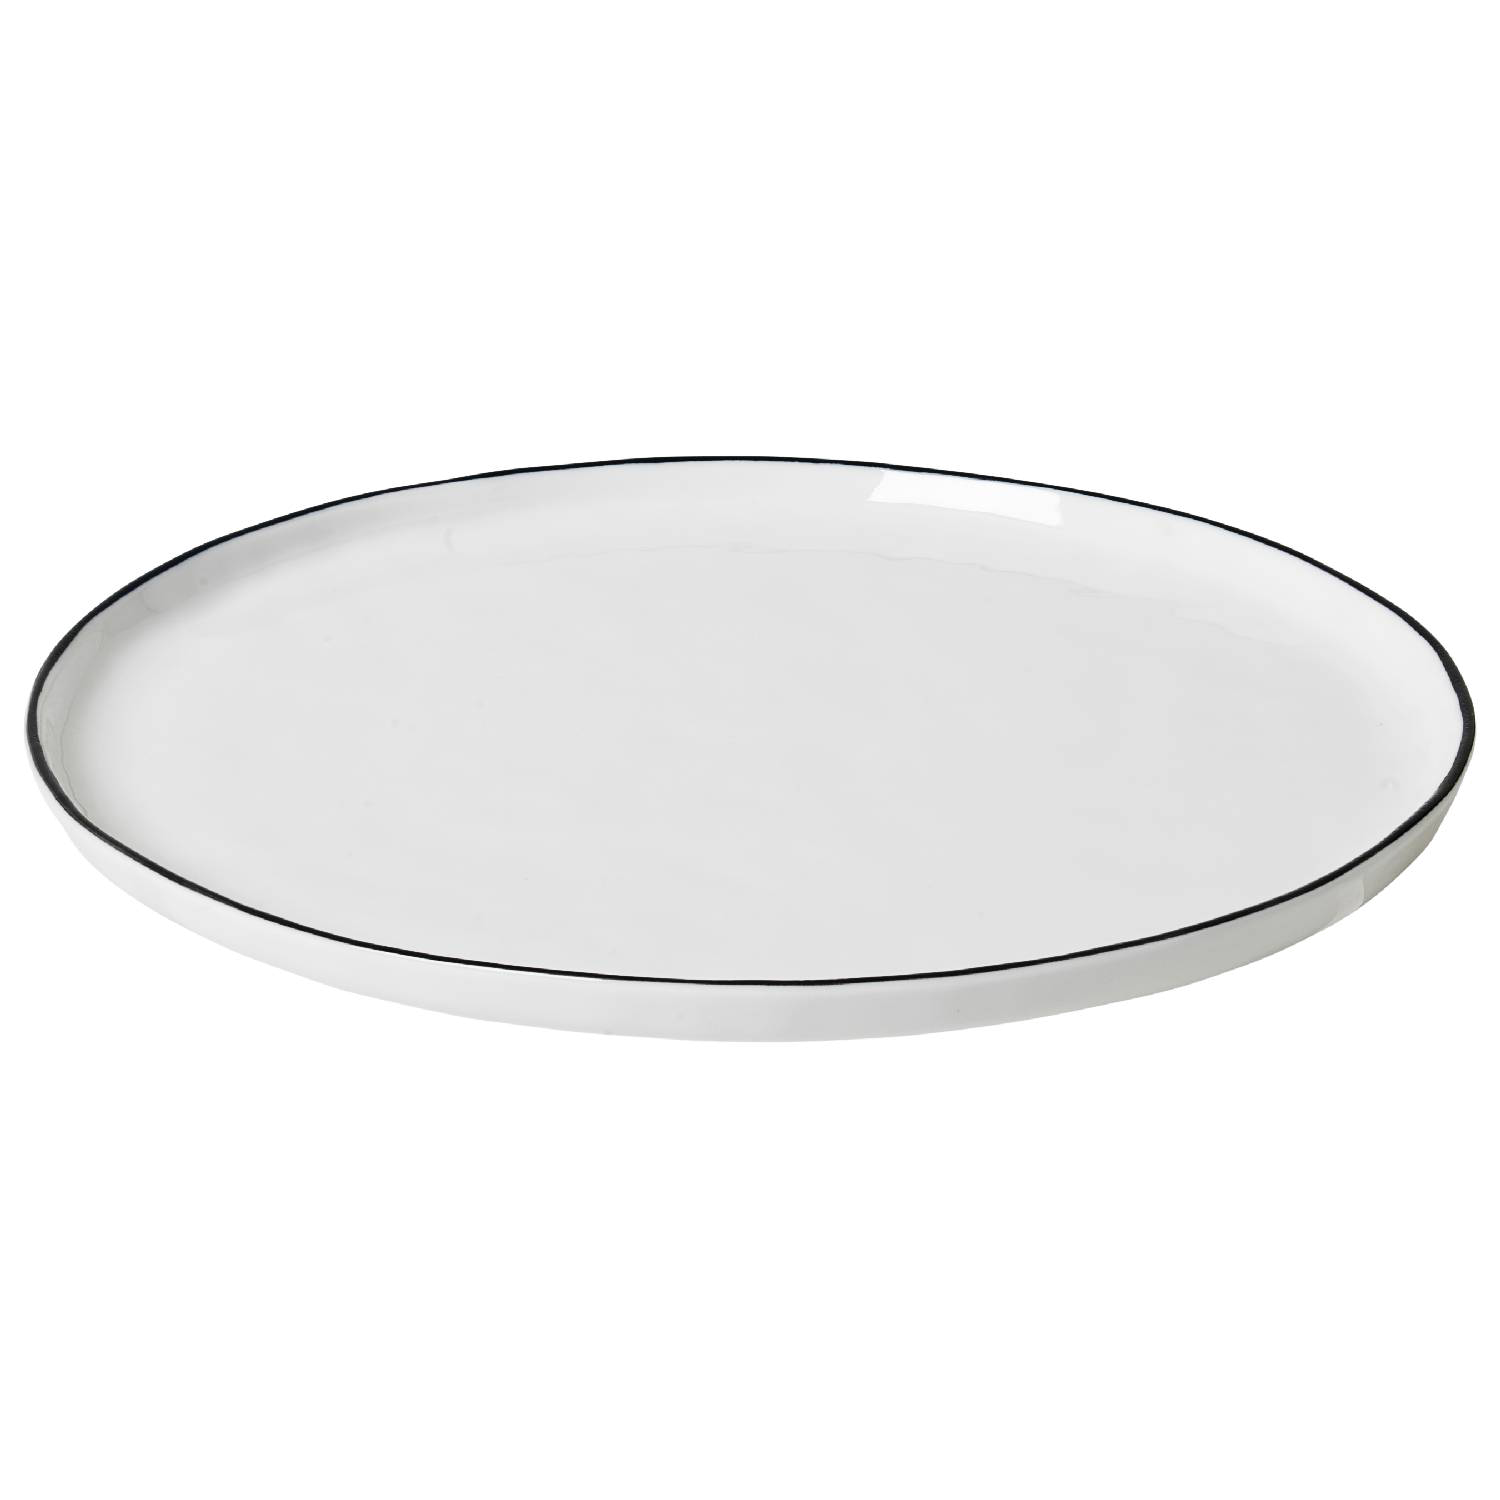 White Plate PNG Images HD